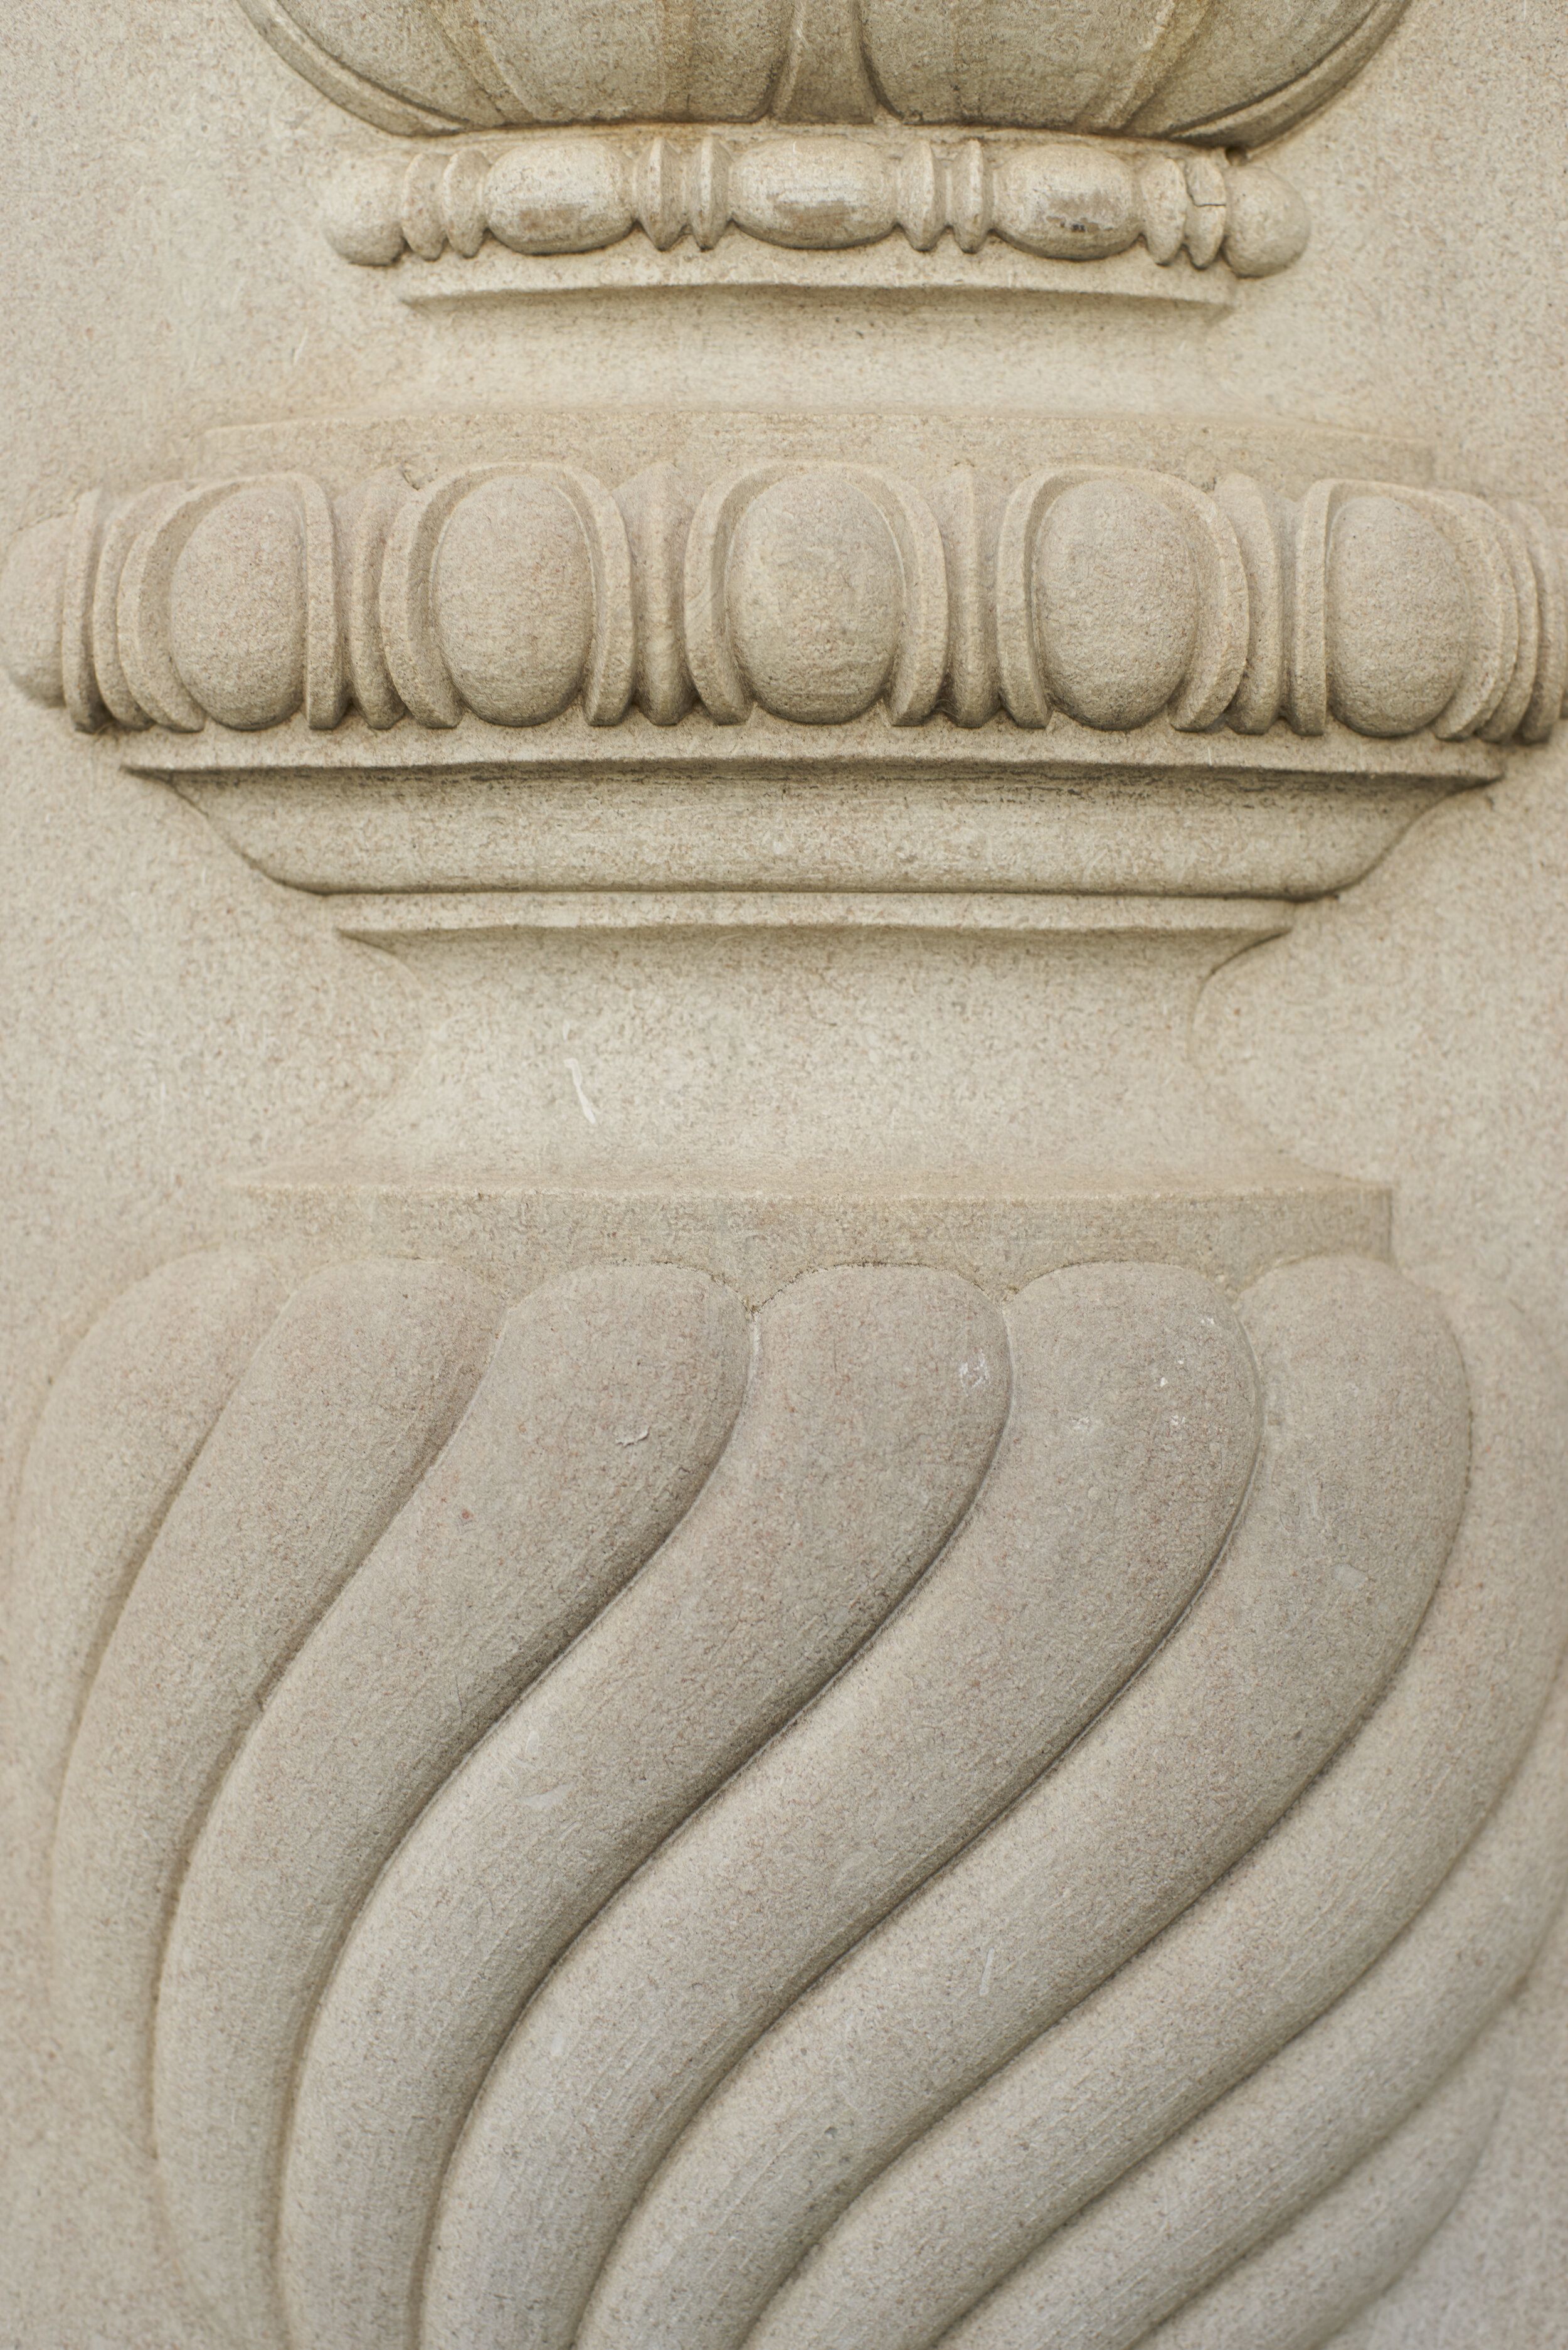 Candoro Marble Building detail. Bruce Cole Photography